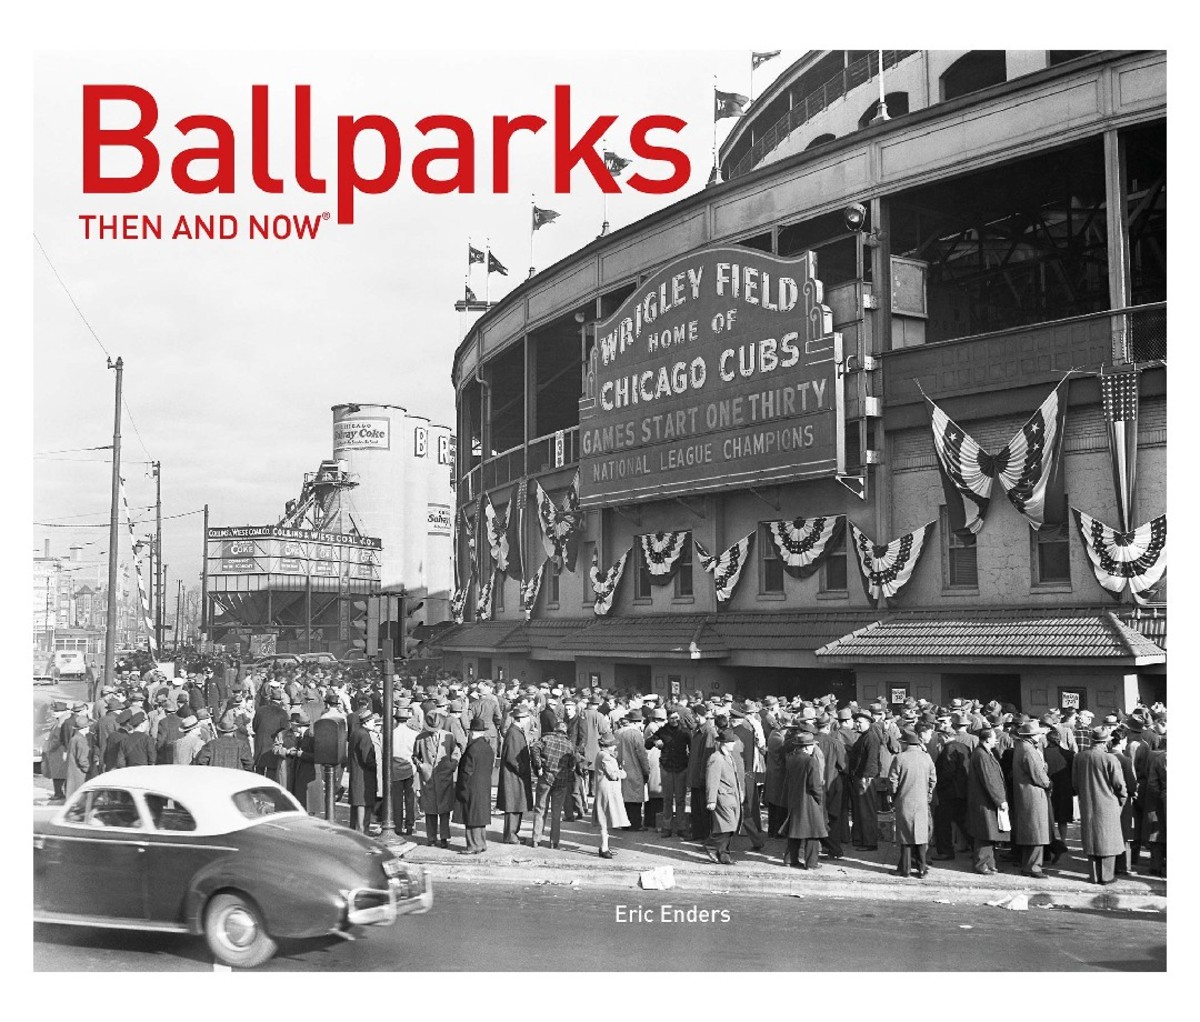 Ballparks Then and Now by Eric Enders